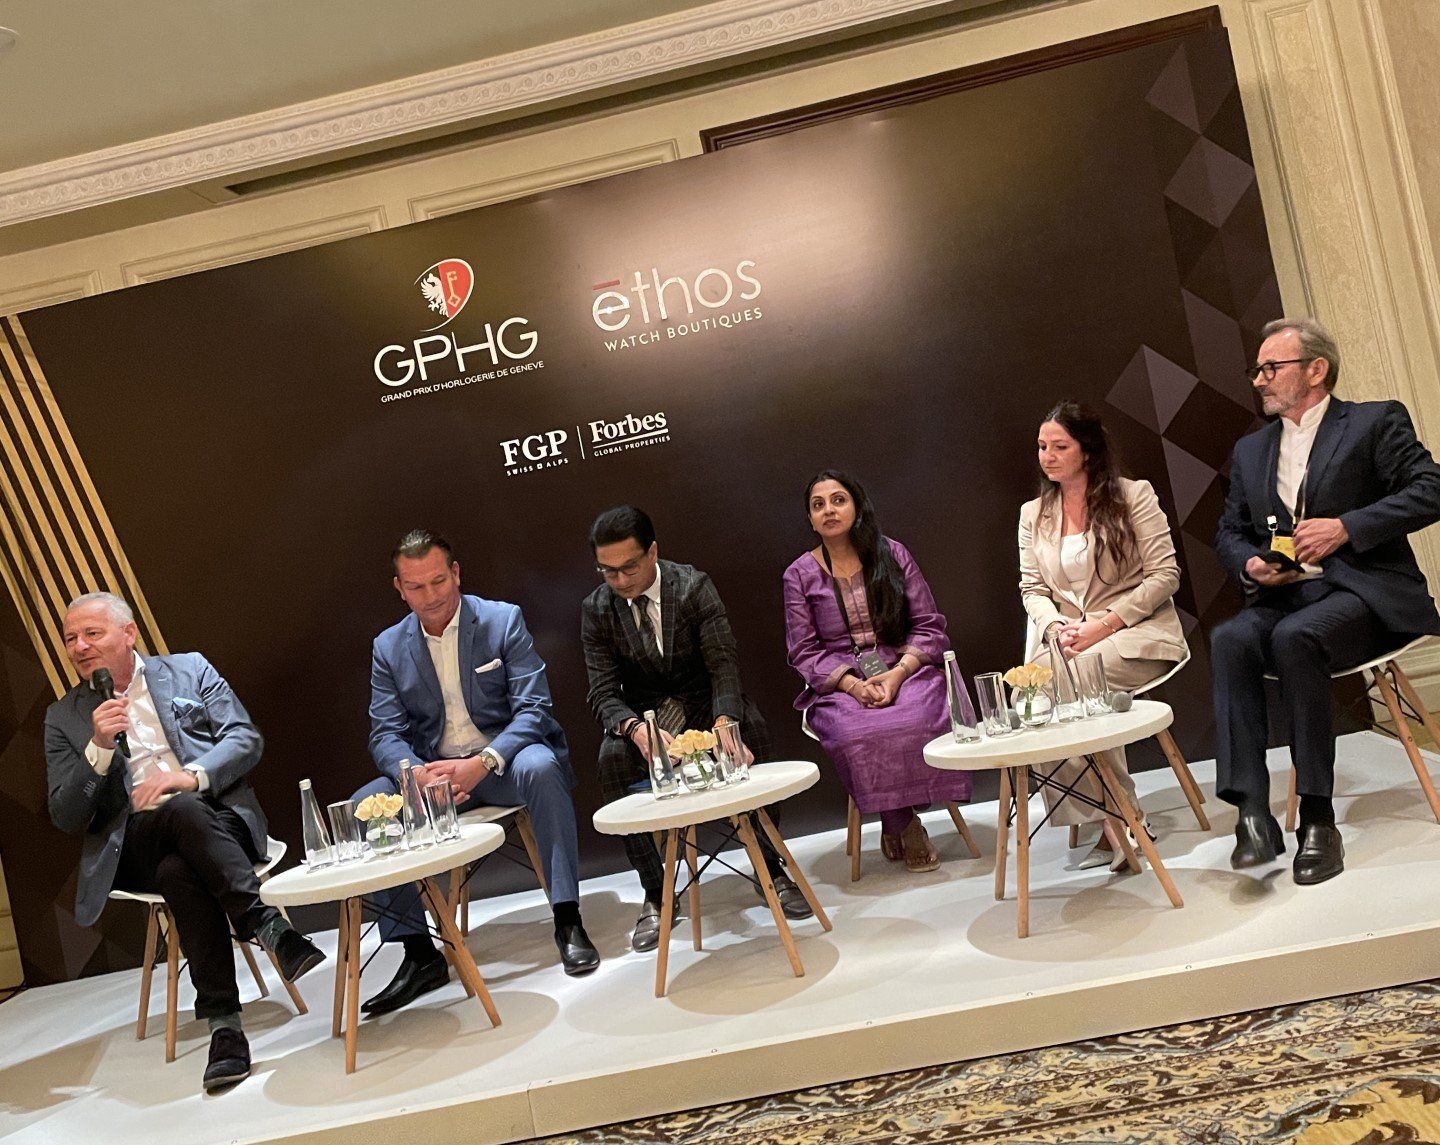 Patrik Hoffmann, EVP Watchbox Europe, Jan Edocs, CEO, Doxa Watches, Mohit Hemdev, Country Manager in India for Officine Panerai, Suparna Mitra, Chief Executive Officer - Watches and Wearables division TITAN ,Leila Kamali, Oris Watches and Raymond Loretan, President GPHG